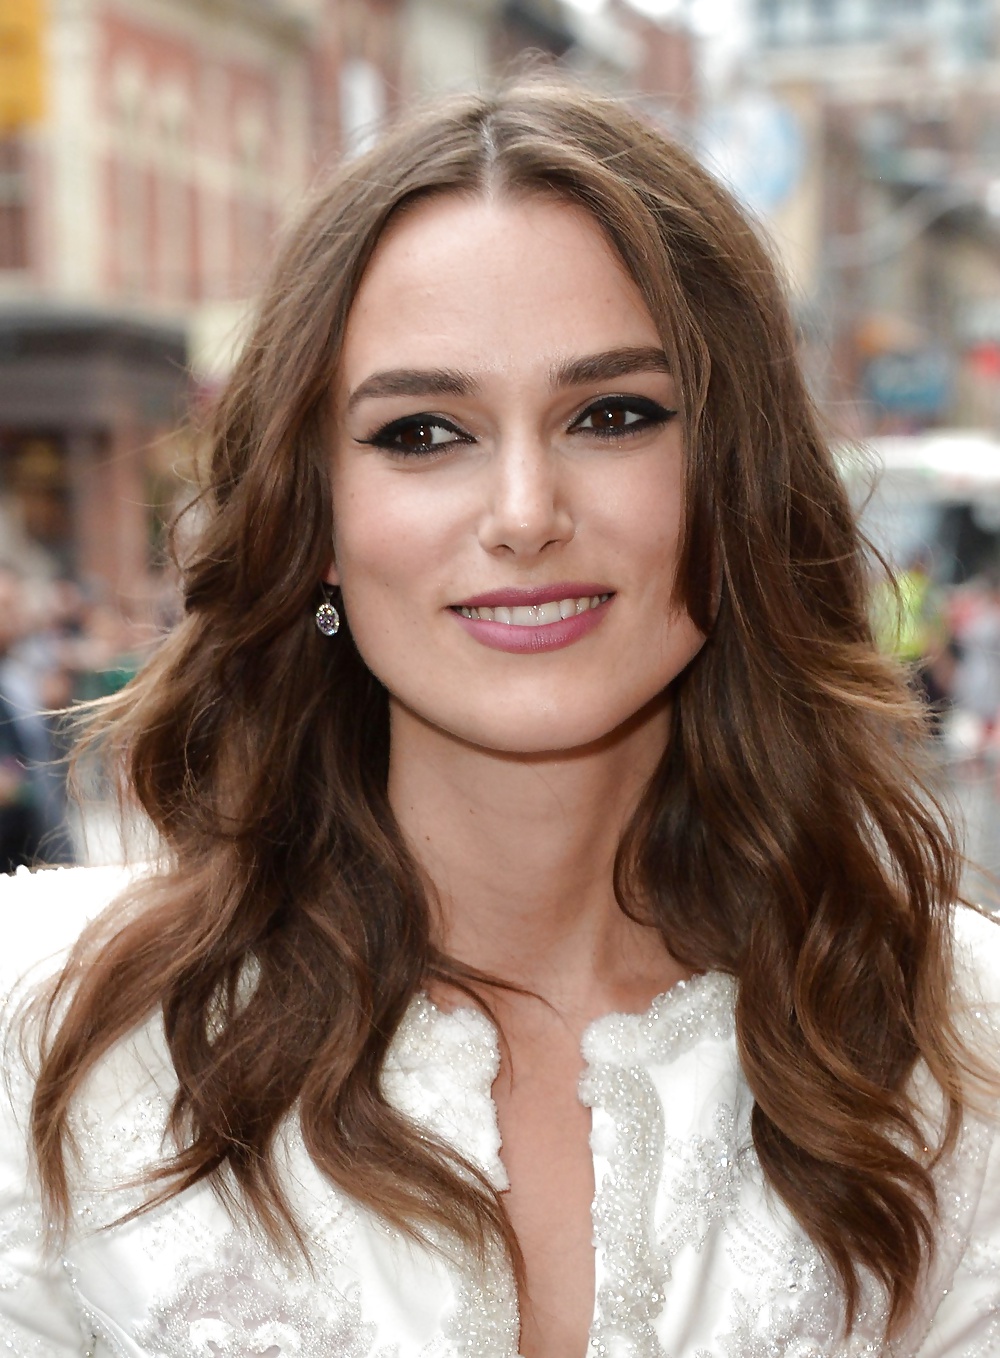 Keira Knightley The Royal Lady of England #35649427